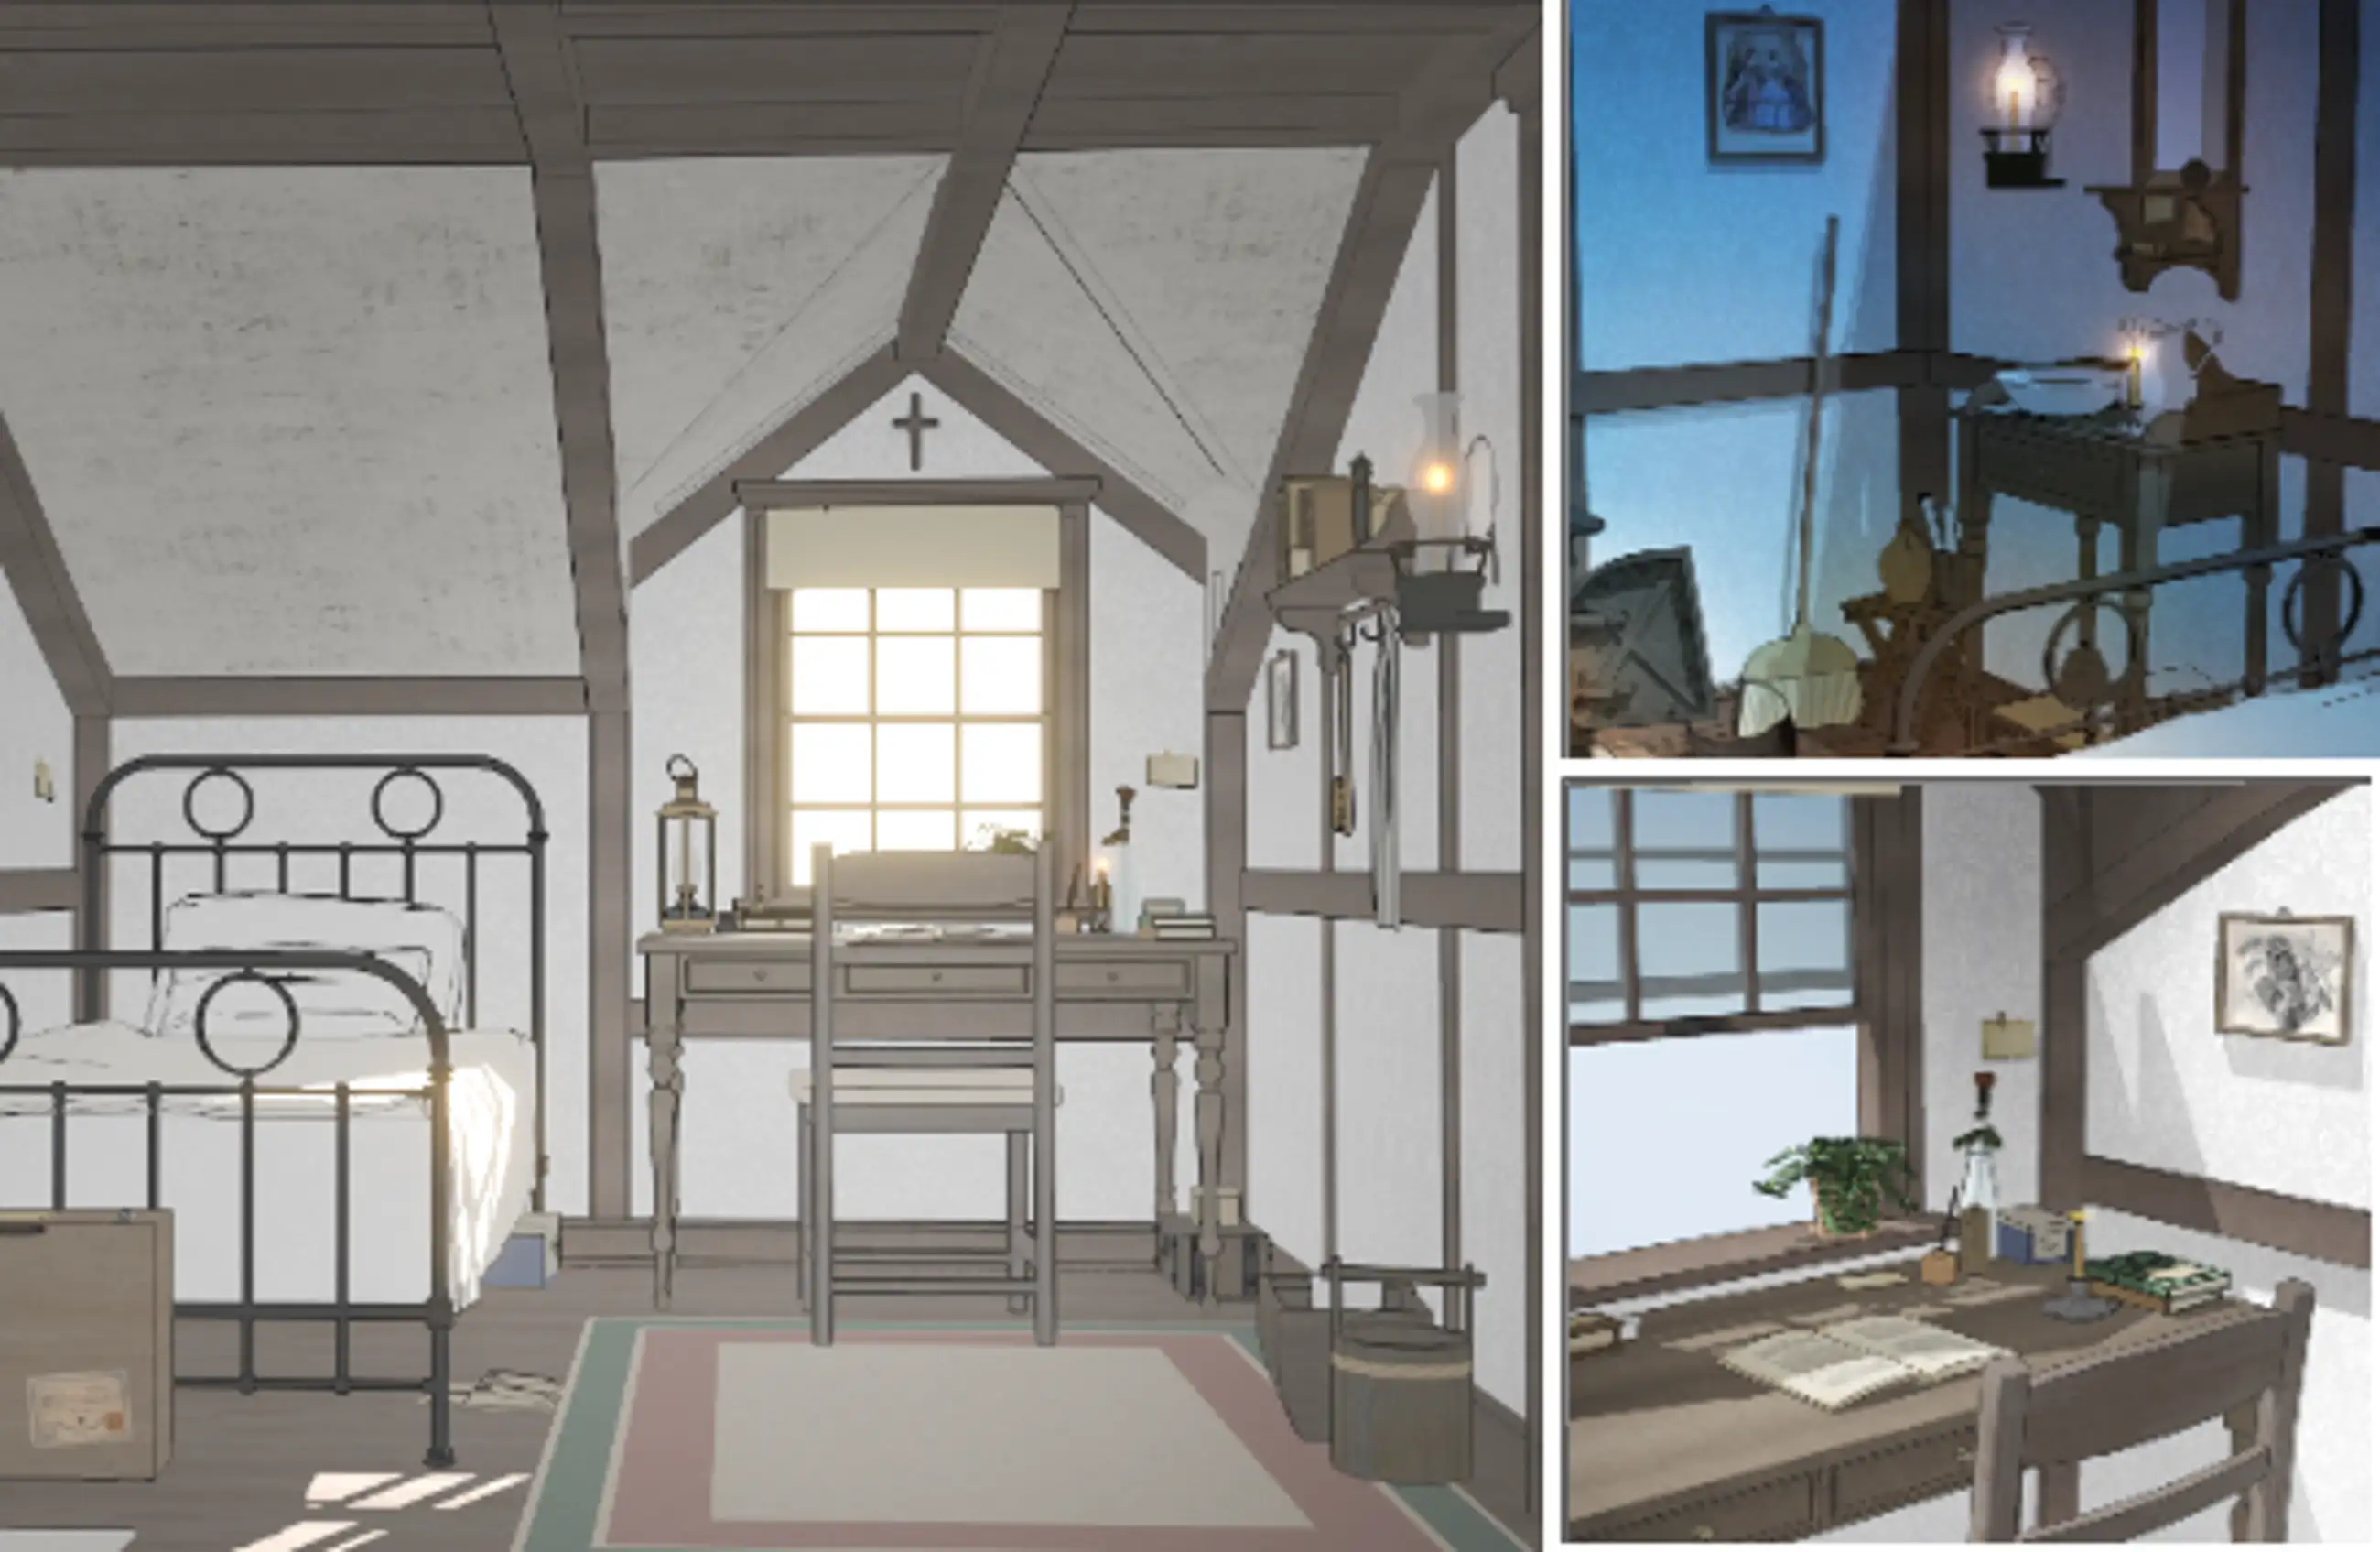 Servant's Room - a modest but cozy Victorian house